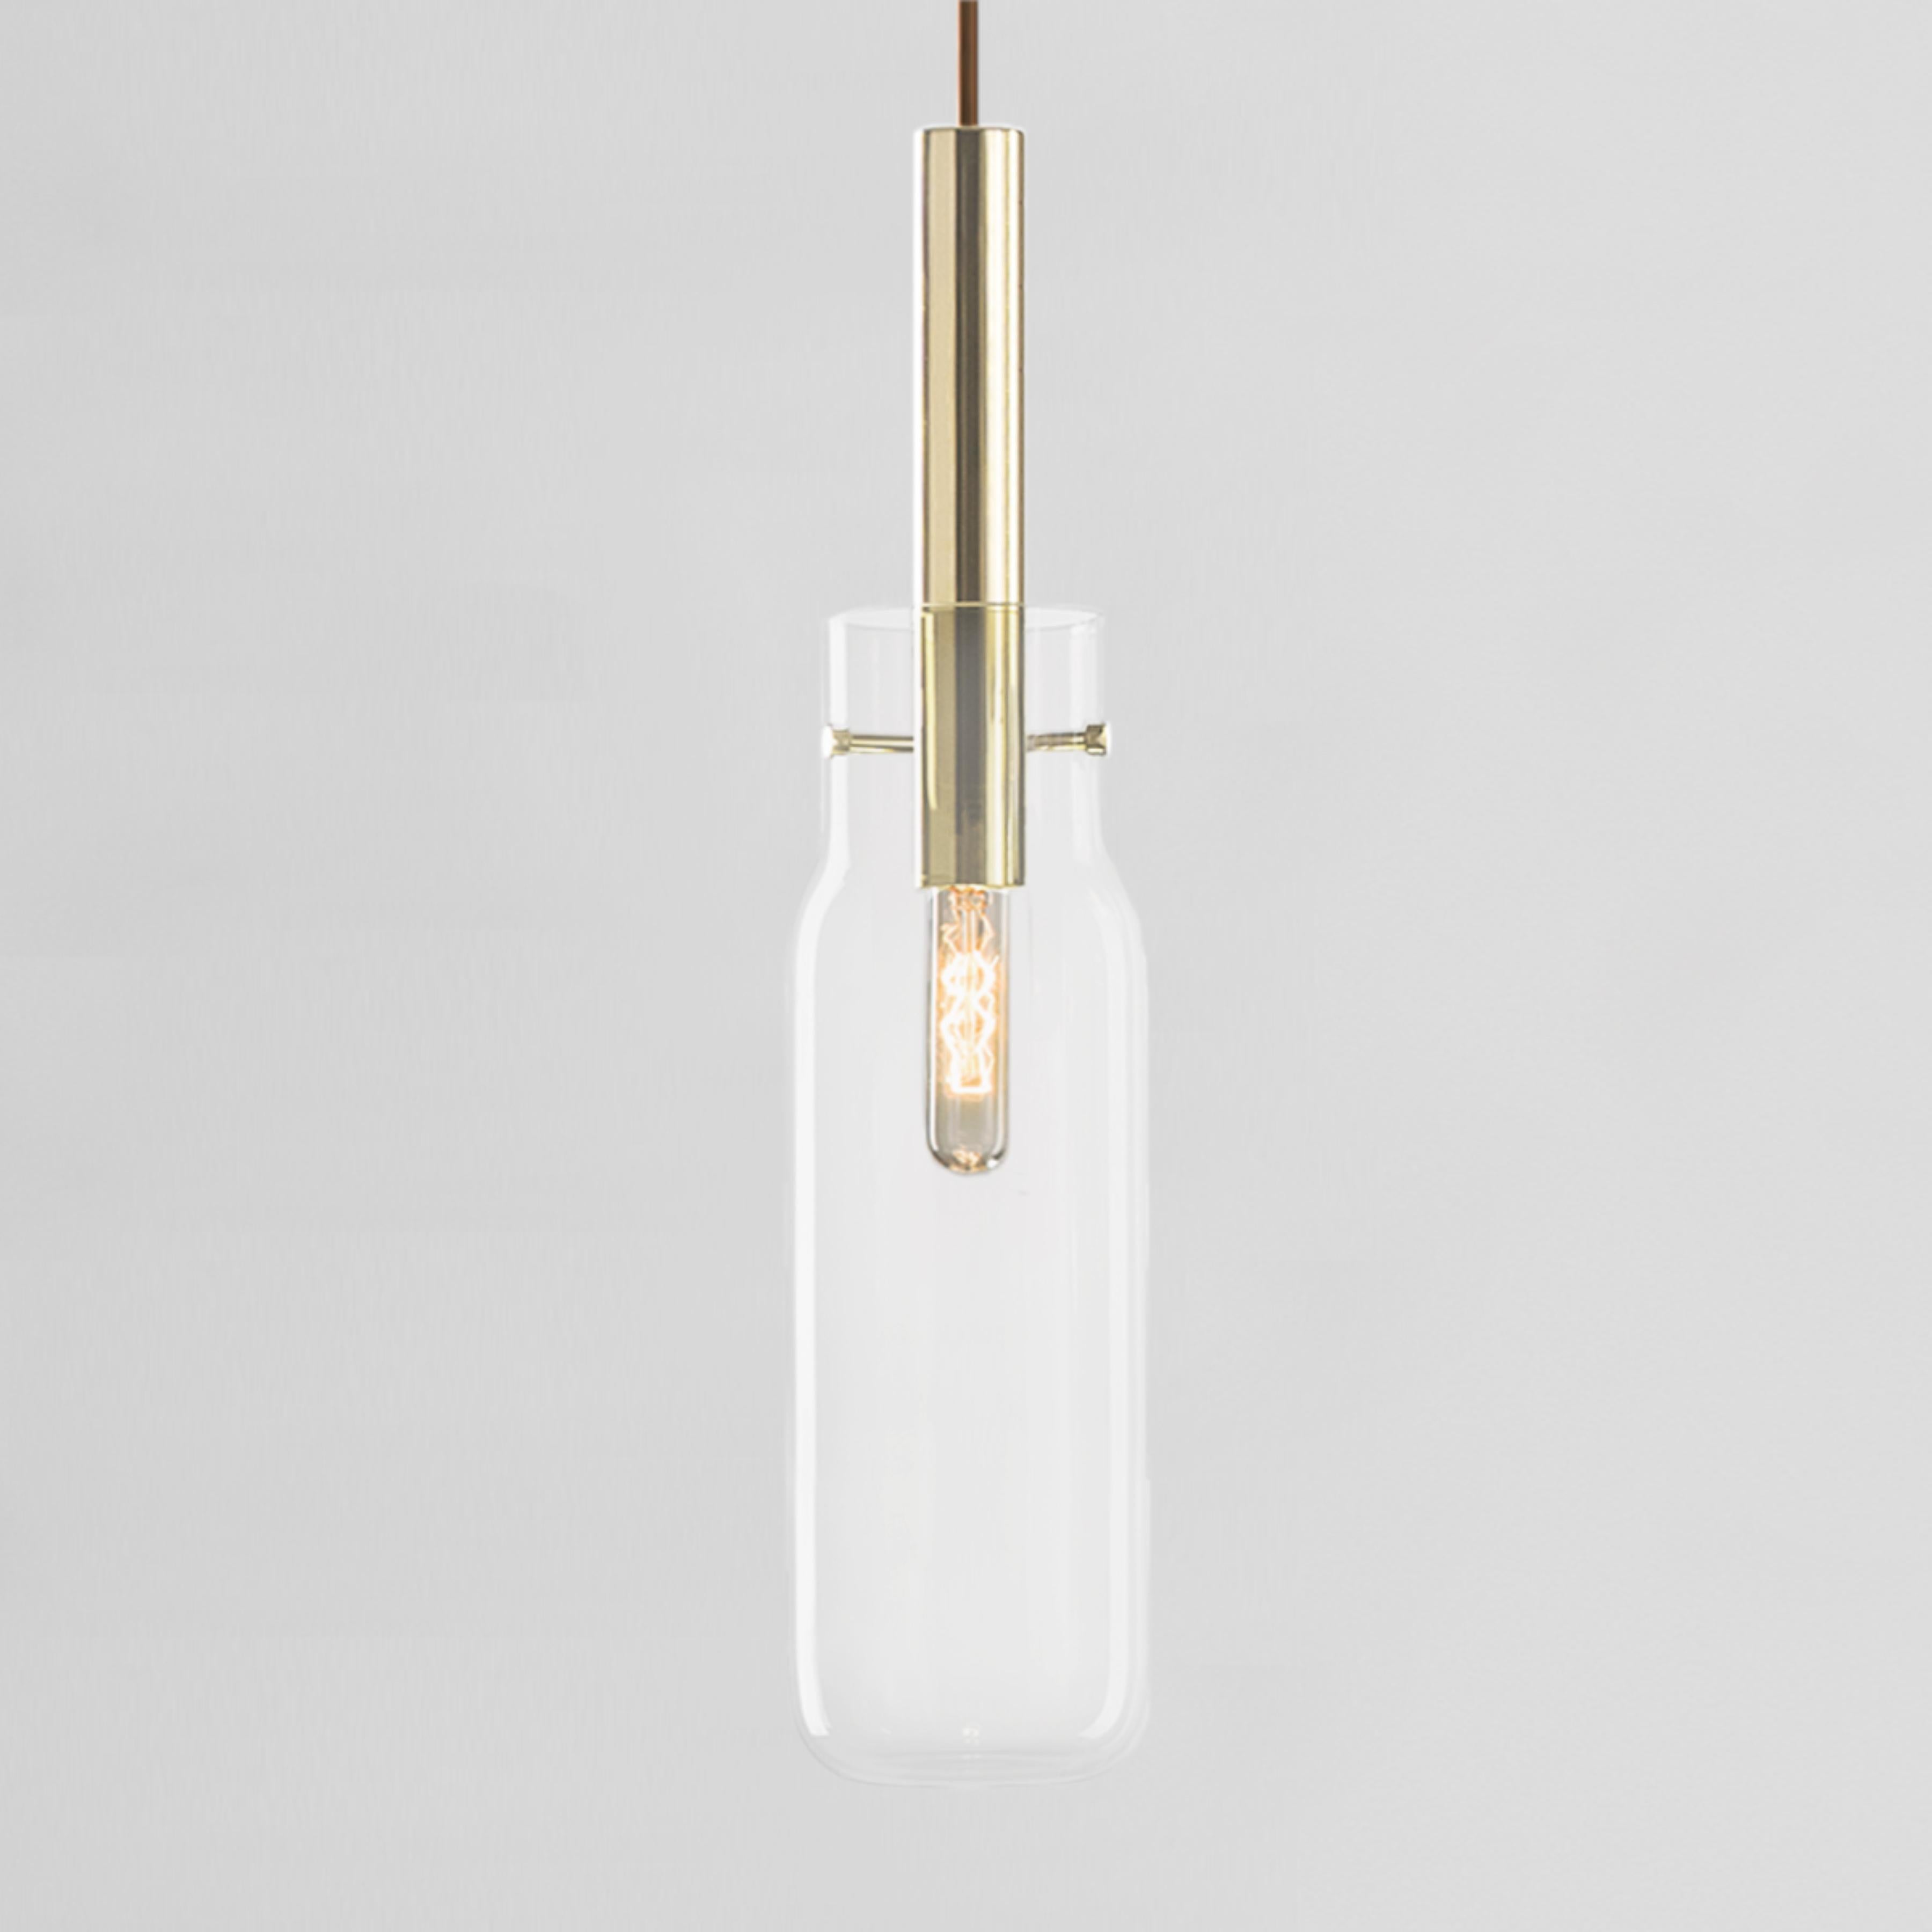 Tall Bandaska pendant light by Dechem Studio.
Dimensions: D 9 x H 180 cm.
Materials: brass, glass.
Also available: different colours and sizes available.

Hand-blown into beech wood moulds, Bandaska Lights is based on the highly popular